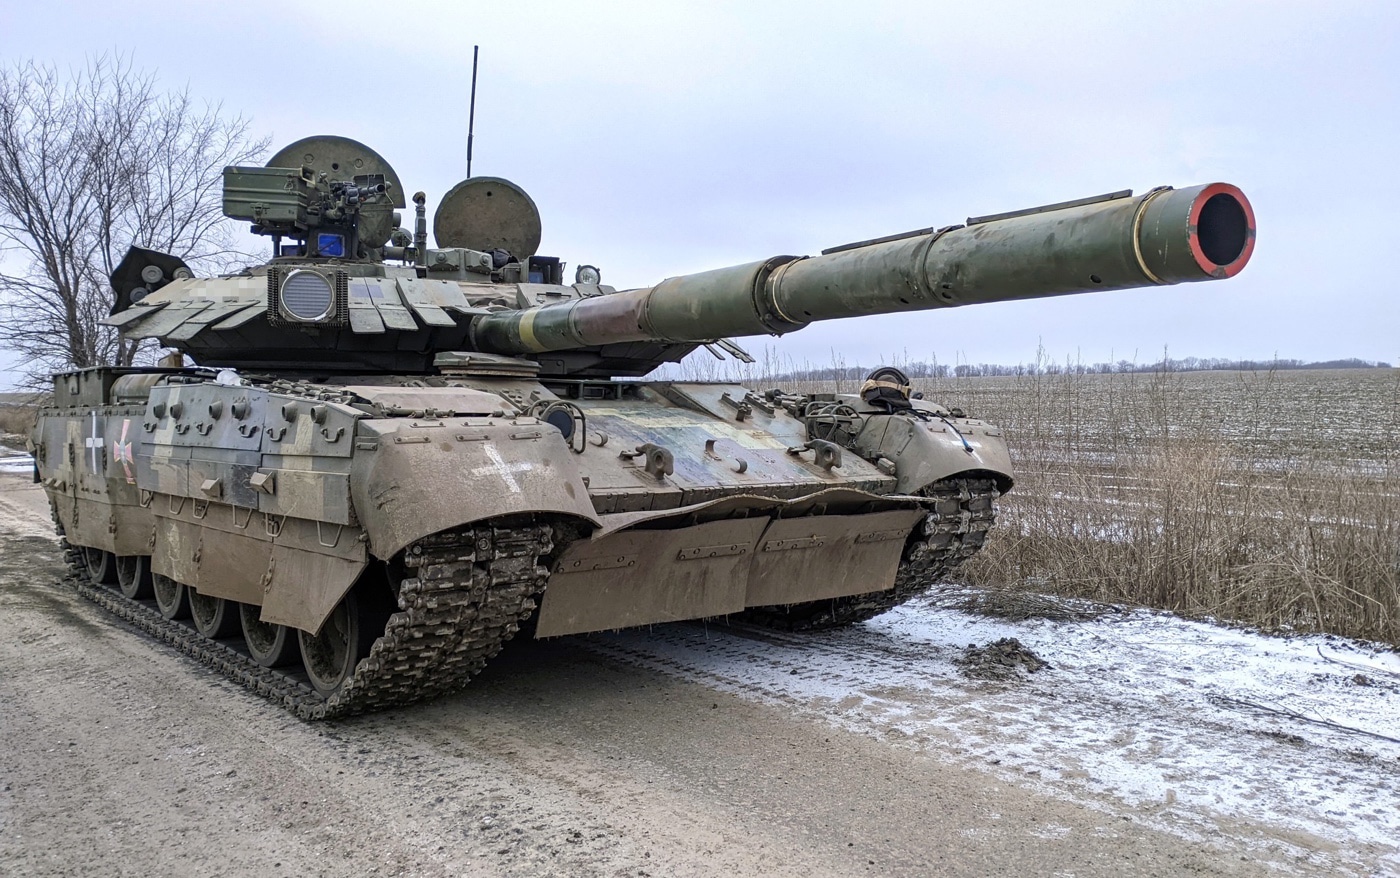 This photo shows a T-84U-tank. According to the the Ministry of Defence of Ukraine it is in current service fighting the invading Russian Army as part of the 3rd Tank Brigade in eastern Ukraine.